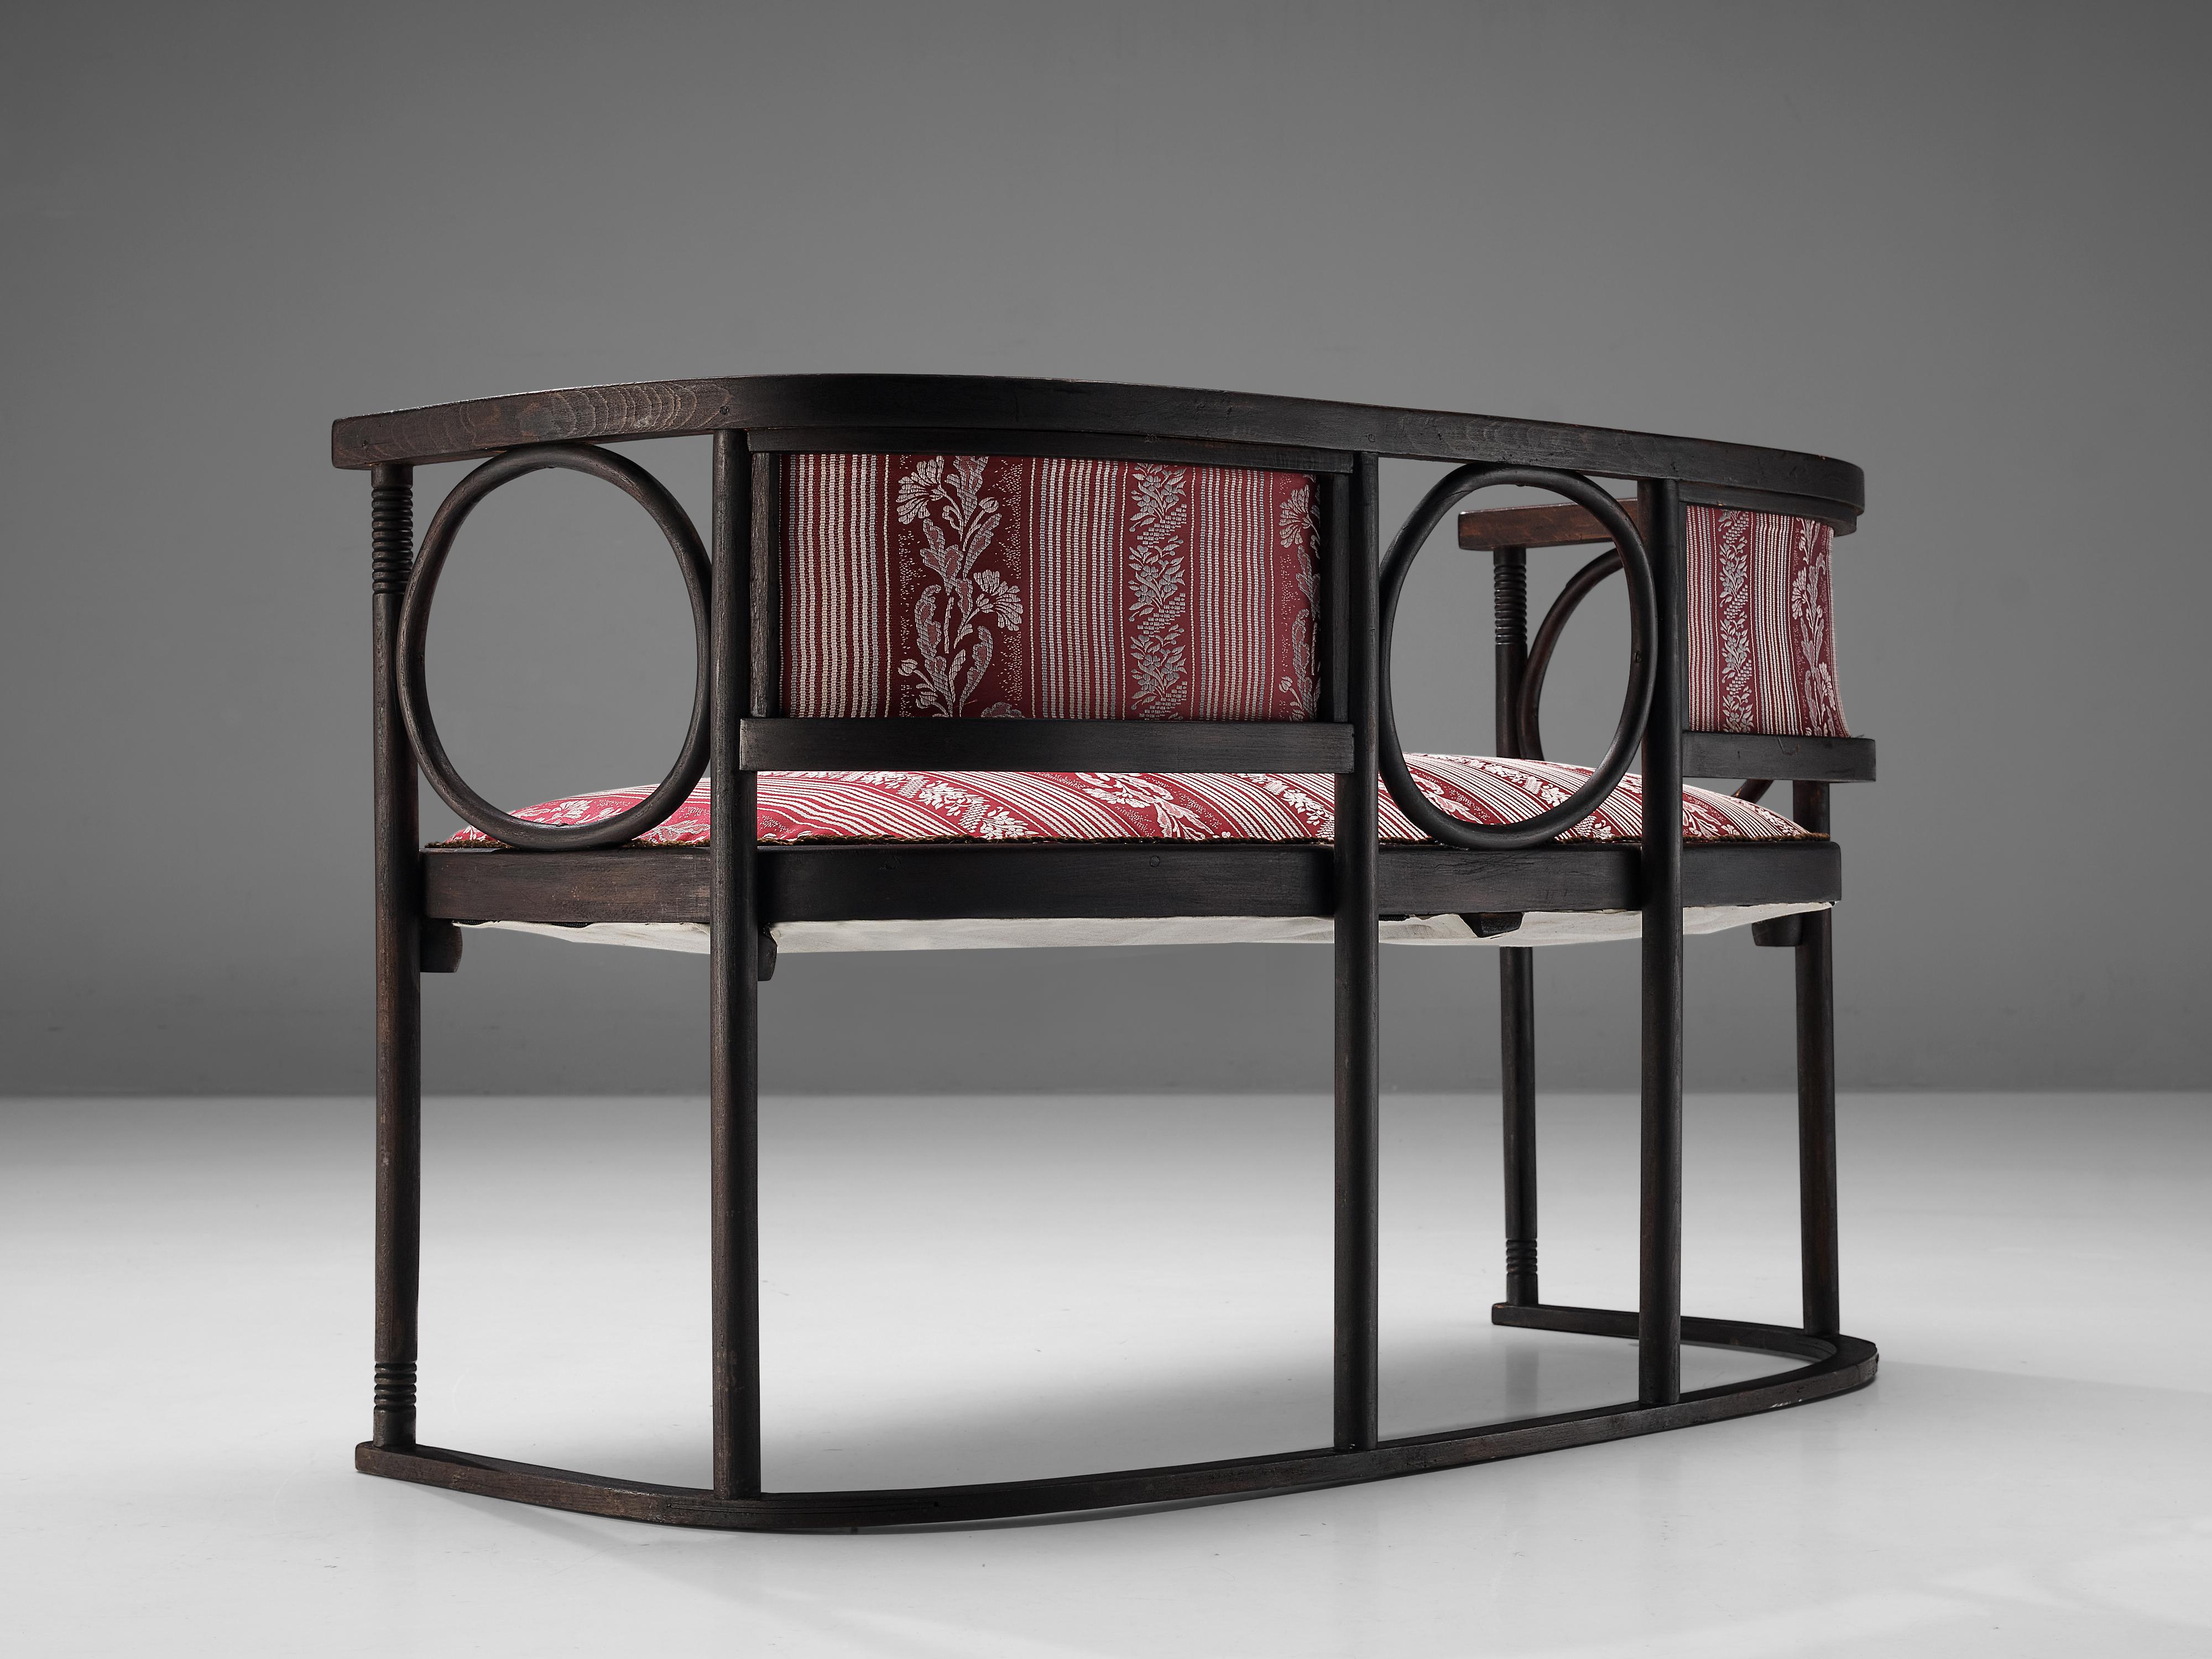 Josef Hoffmann Bench in Floral Upholstery 1